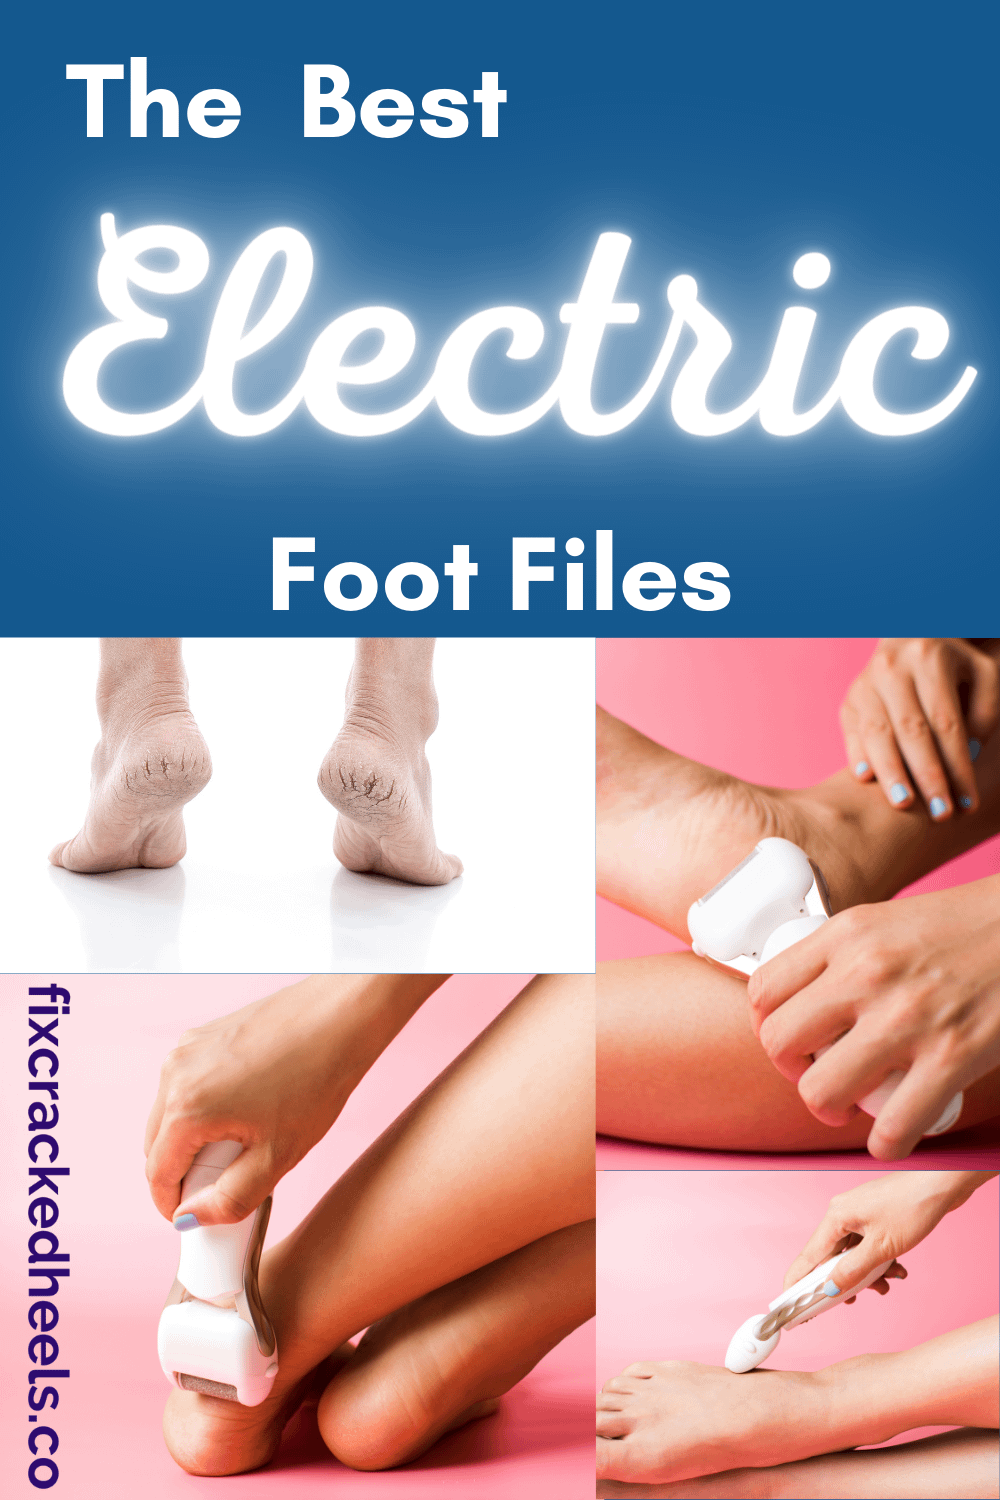 Get your feet summer ready with The Best electrical foot file